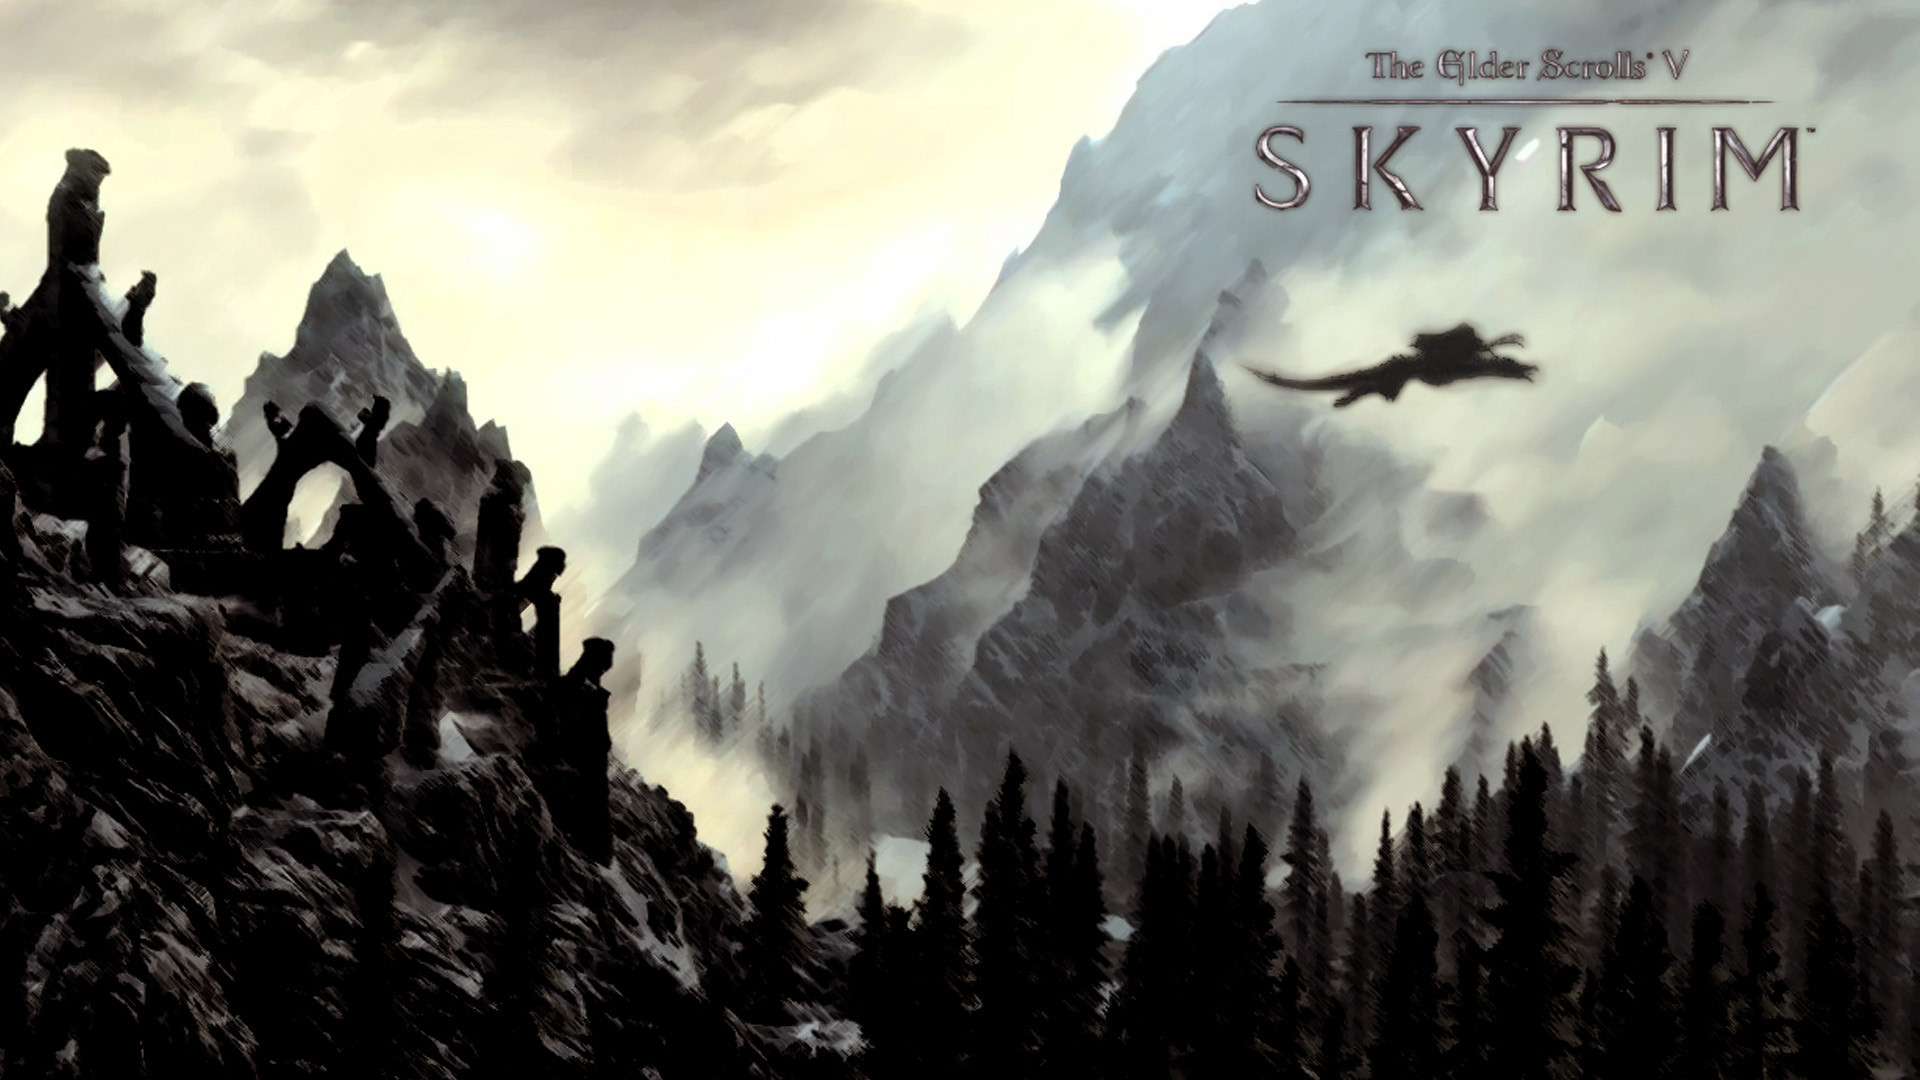 Skyrim Background free download Wallpapers, Backgrounds, Images